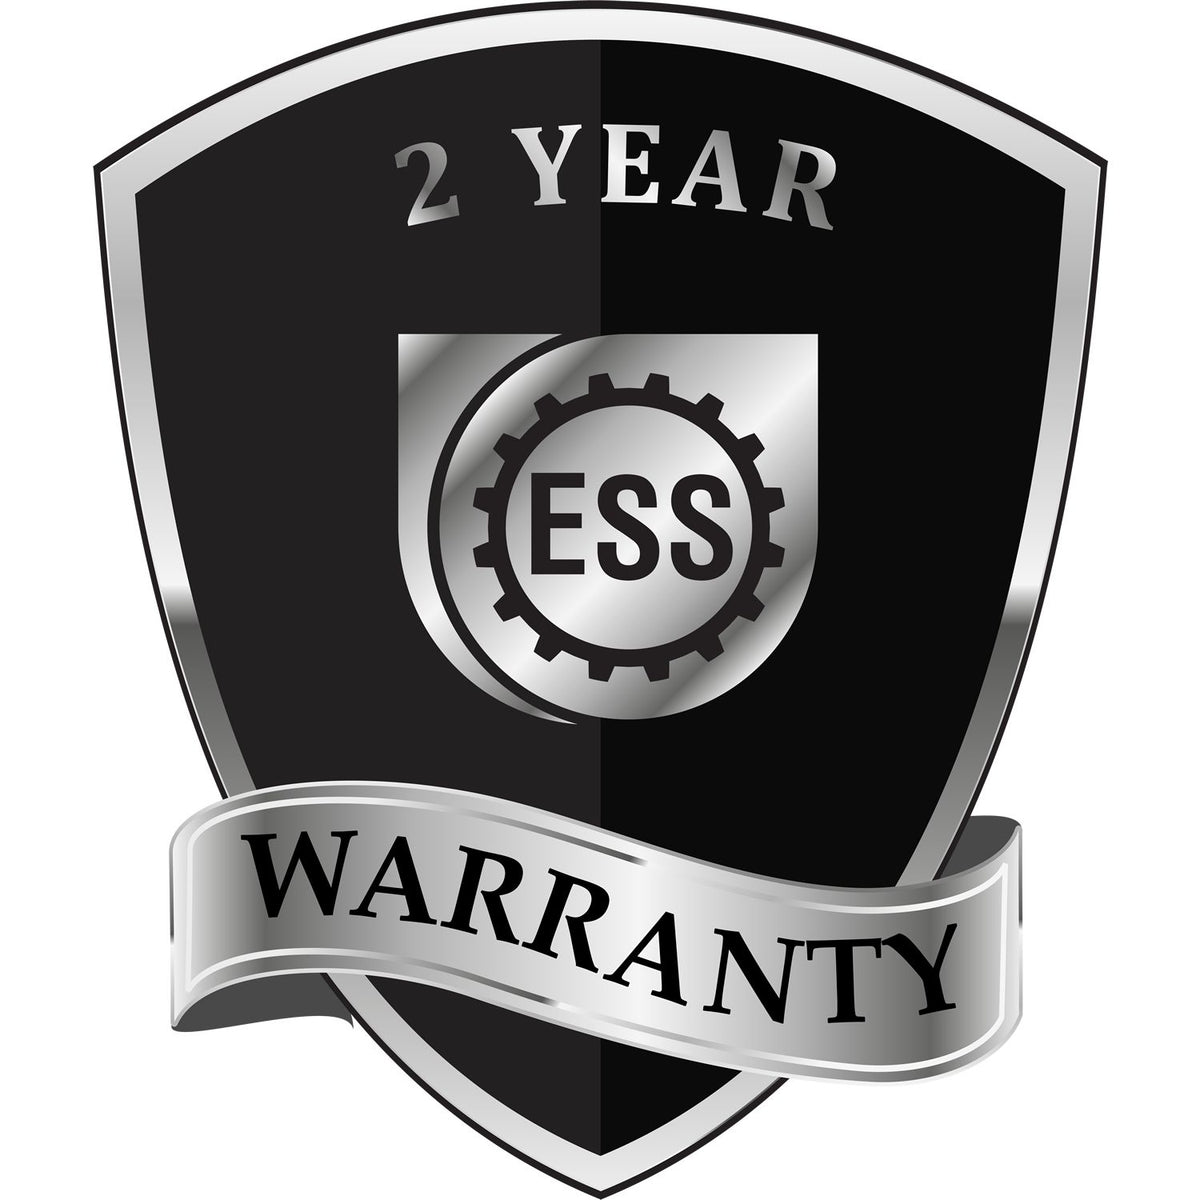 A black and silver badge or emblem showing warranty information for the State of Maryland Extended Long Reach Geologist Seal